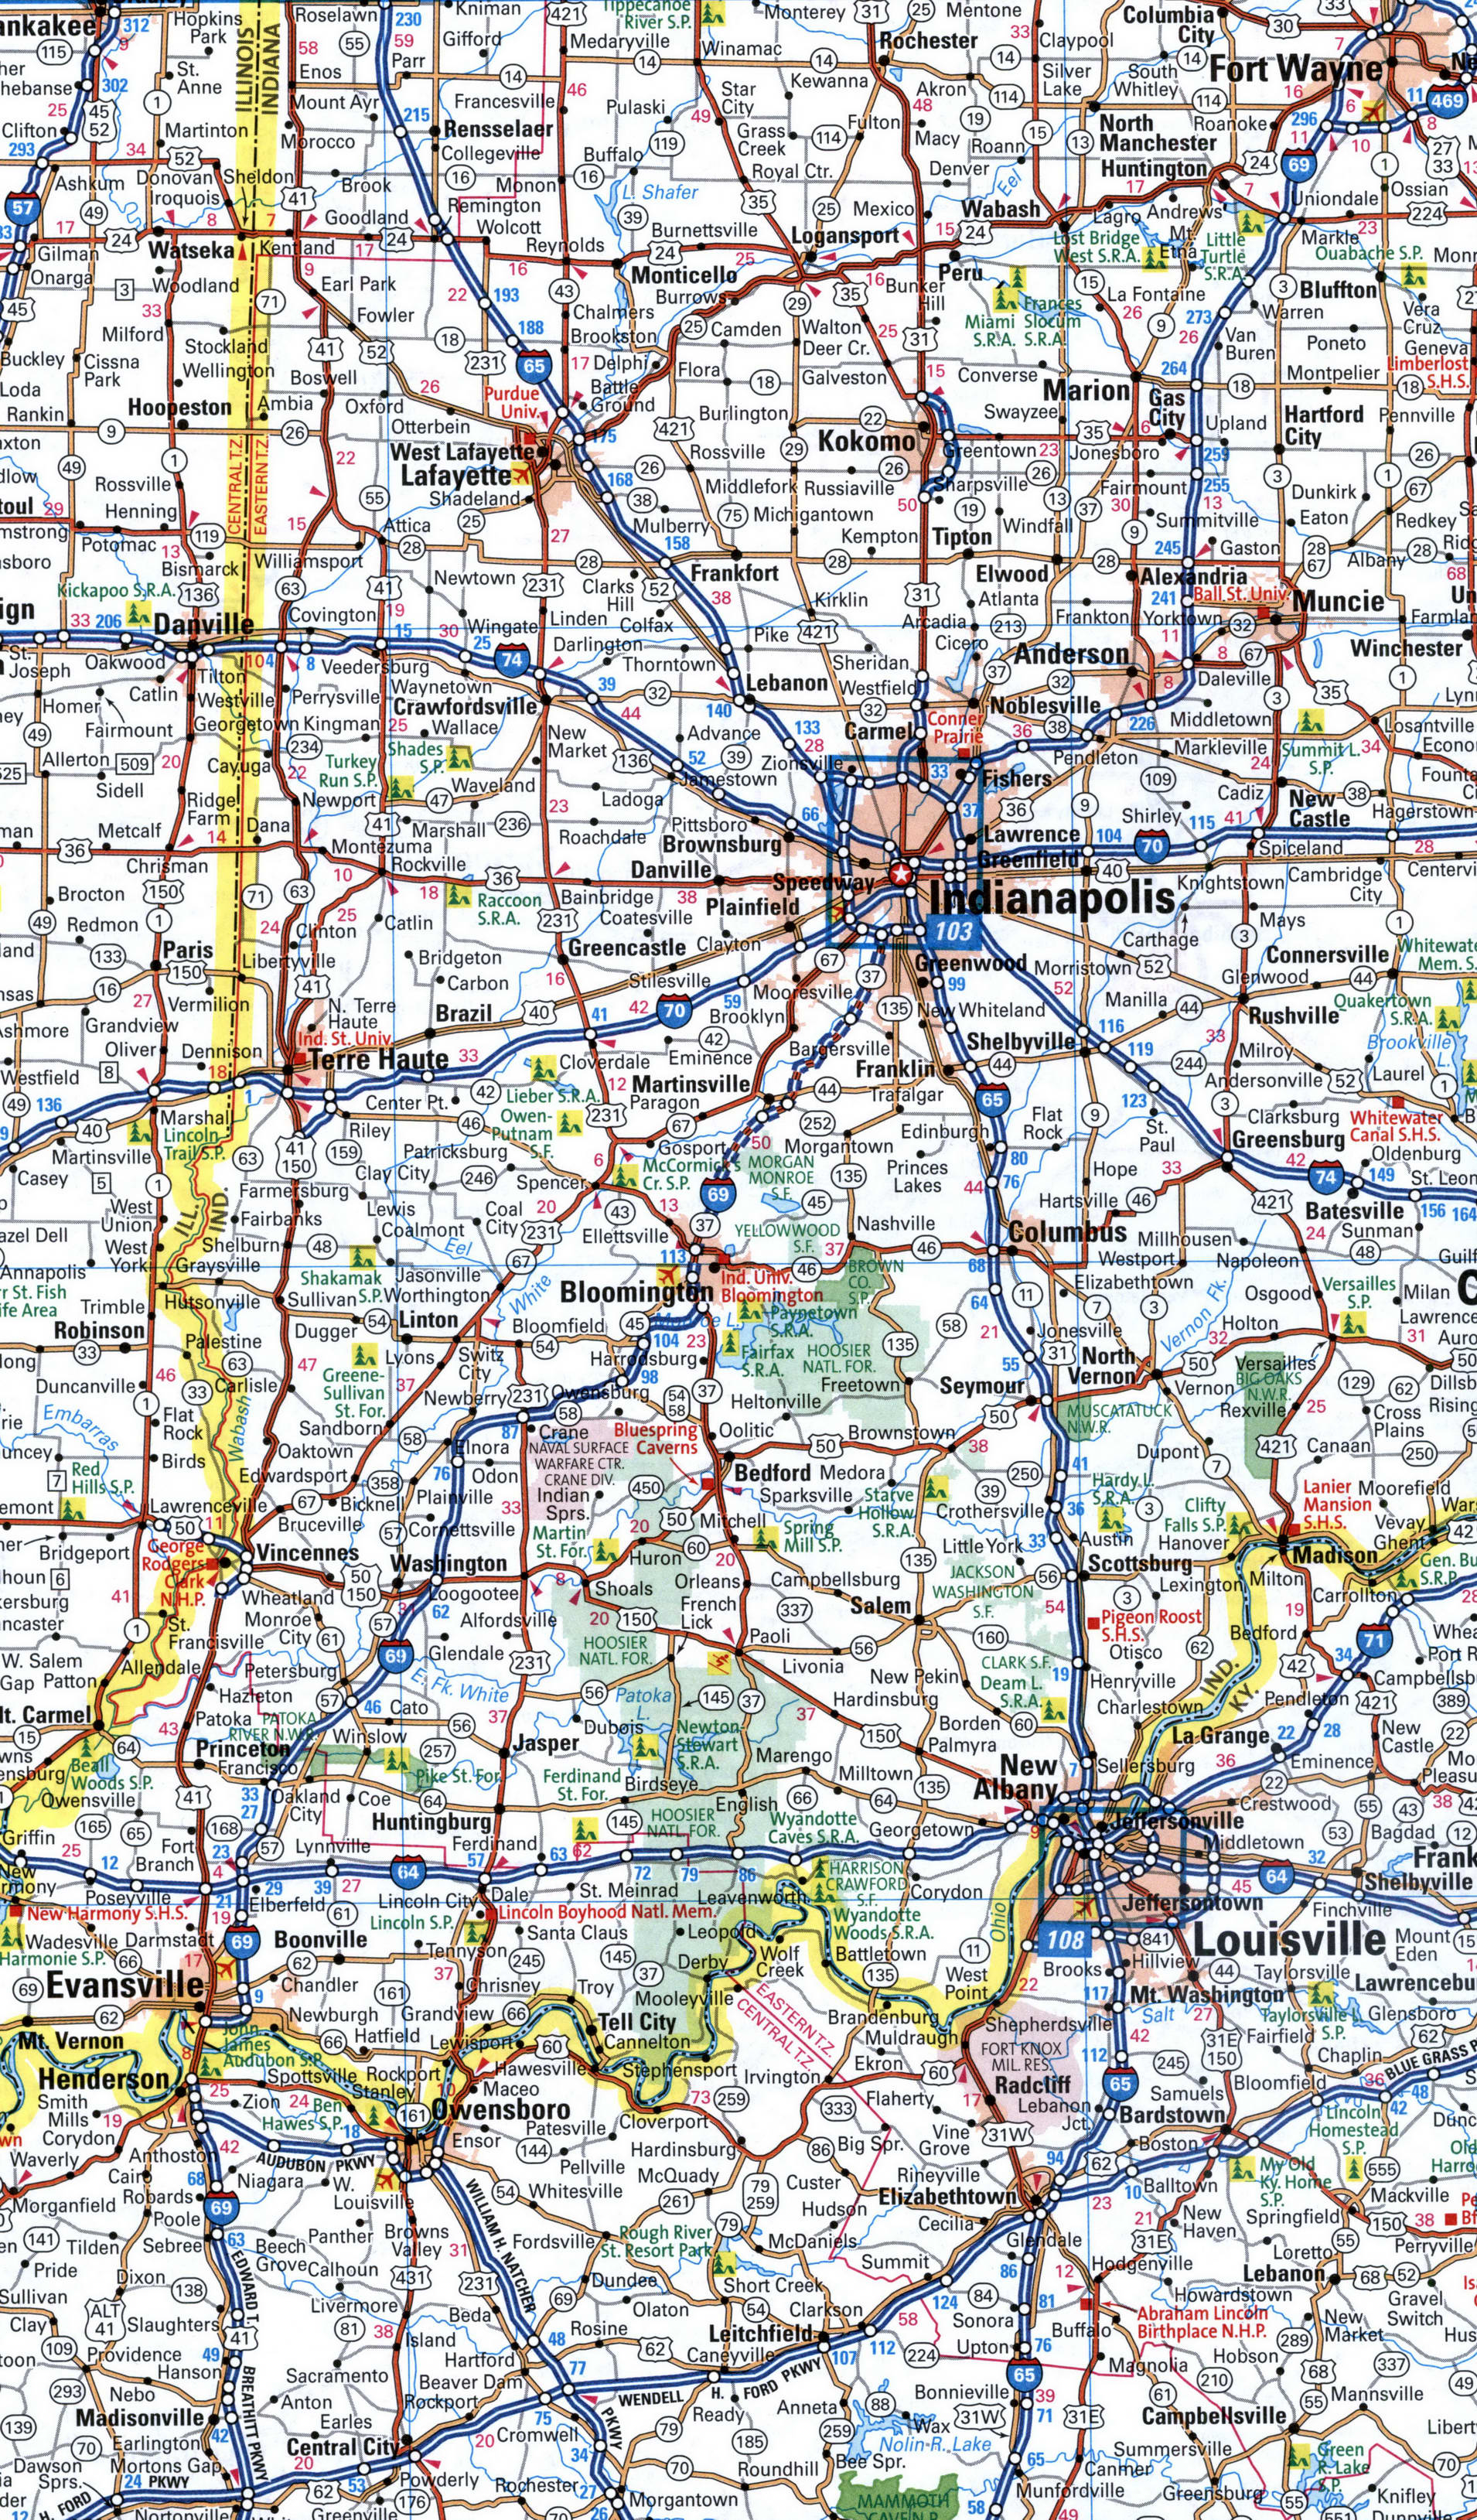 Map route interstate highway I65 Alabama, Tennessee, Kentucky, Indiana